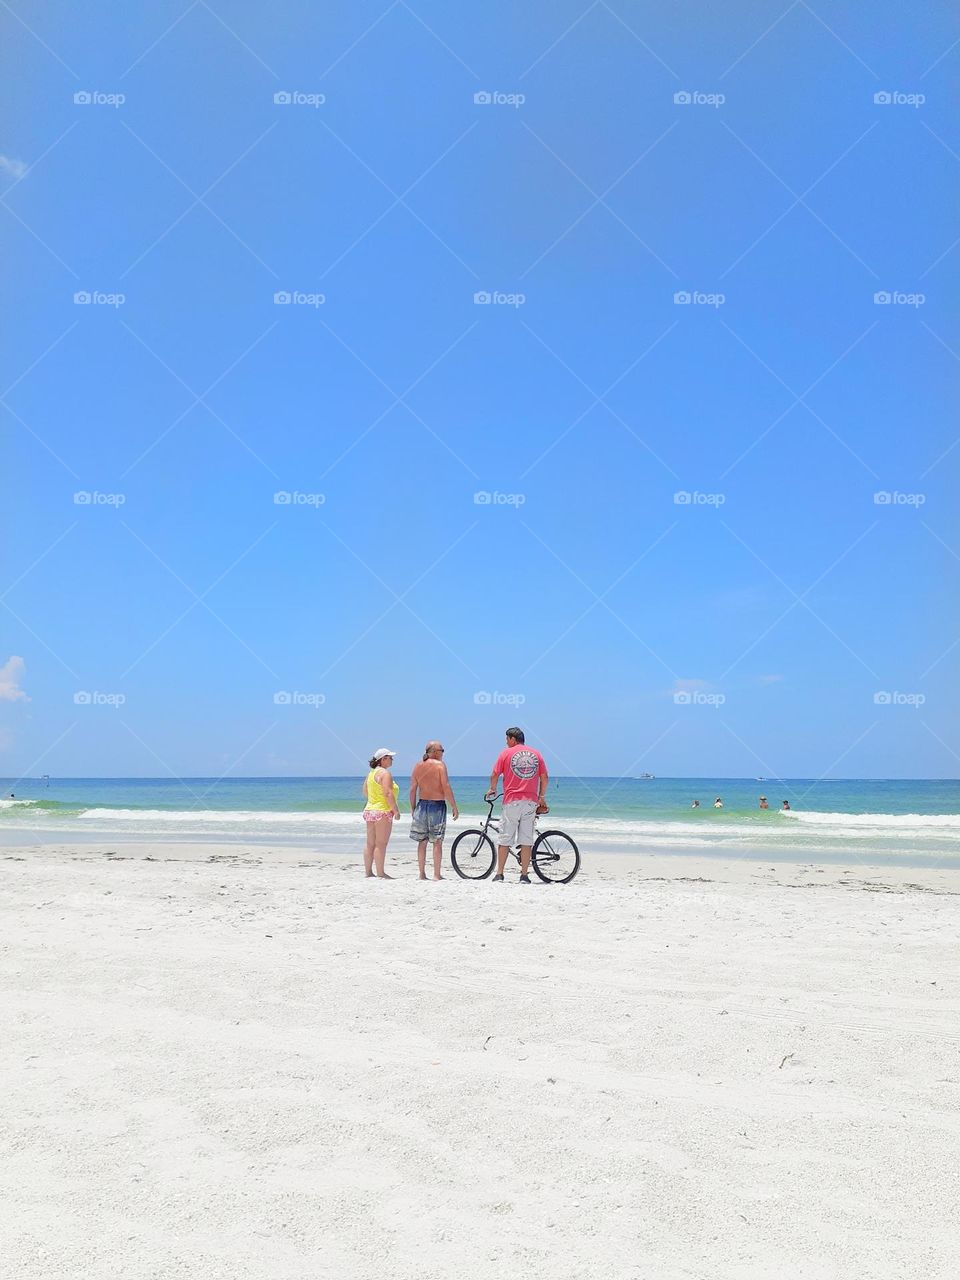 Three friends chat while standing on the beach. One of the friends is holding a bicycle. They are facing the ocean and away from camera.